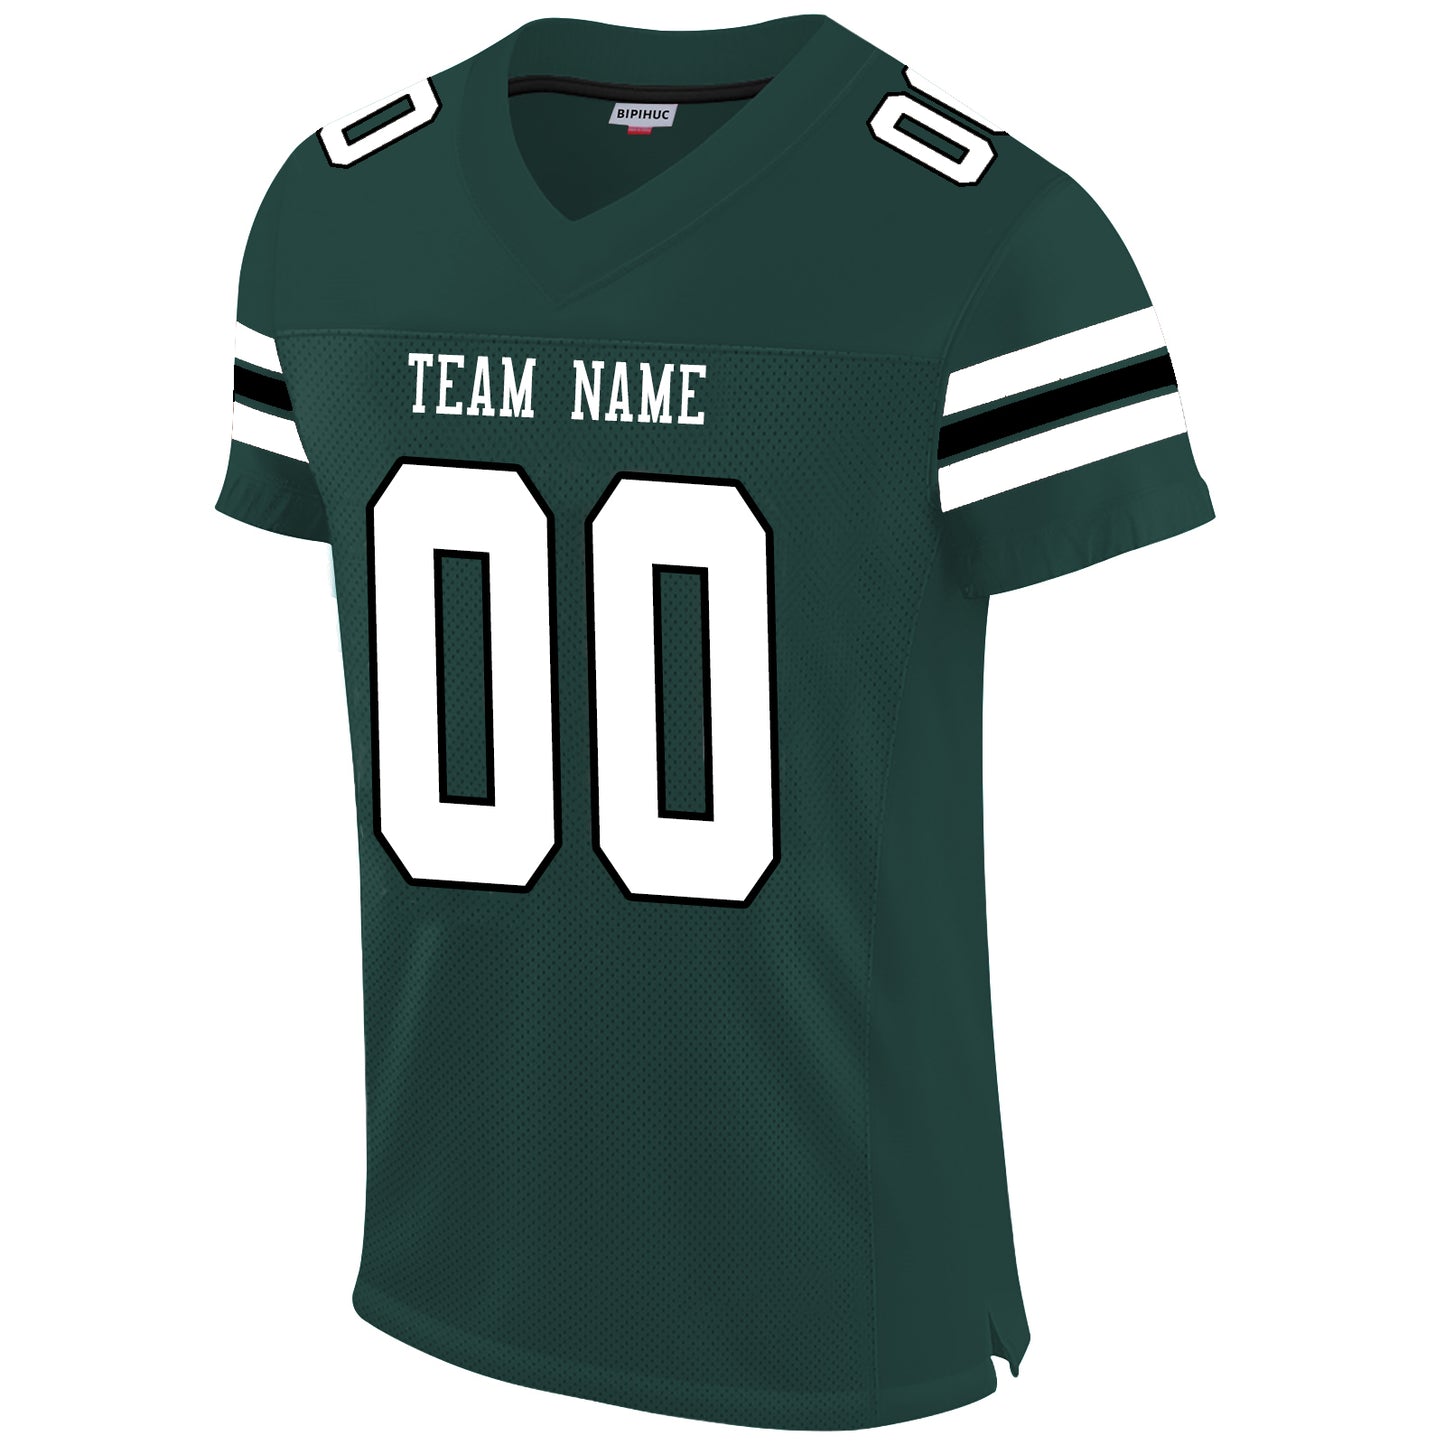 Custom Football Jersey for Philadelphia Eagles Personalize Sports Shirt Design Stitched Name And Number Size S to 6XL Christmas Birthday Gift